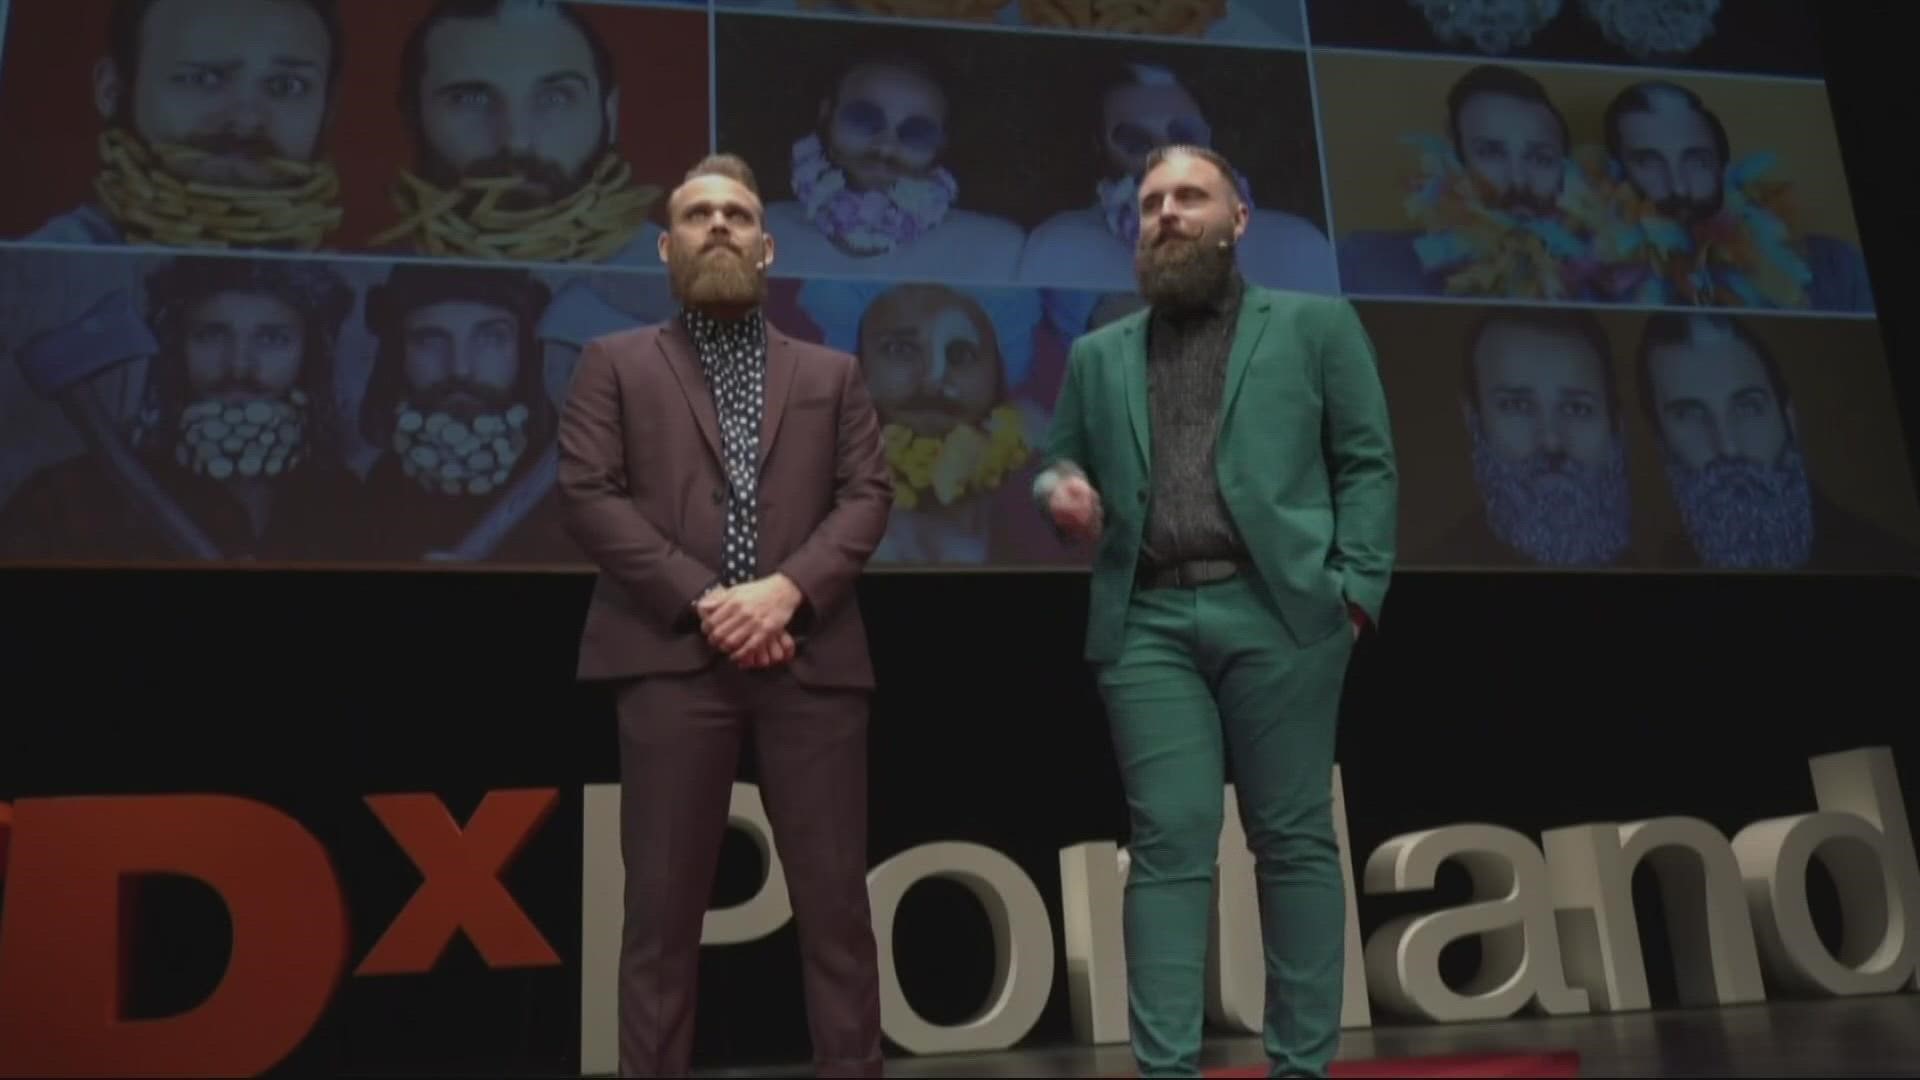 TEDxPortland will return for its 10th year on May 28  at Moda Center. The last in-person TEDxPortland event was in 2019.